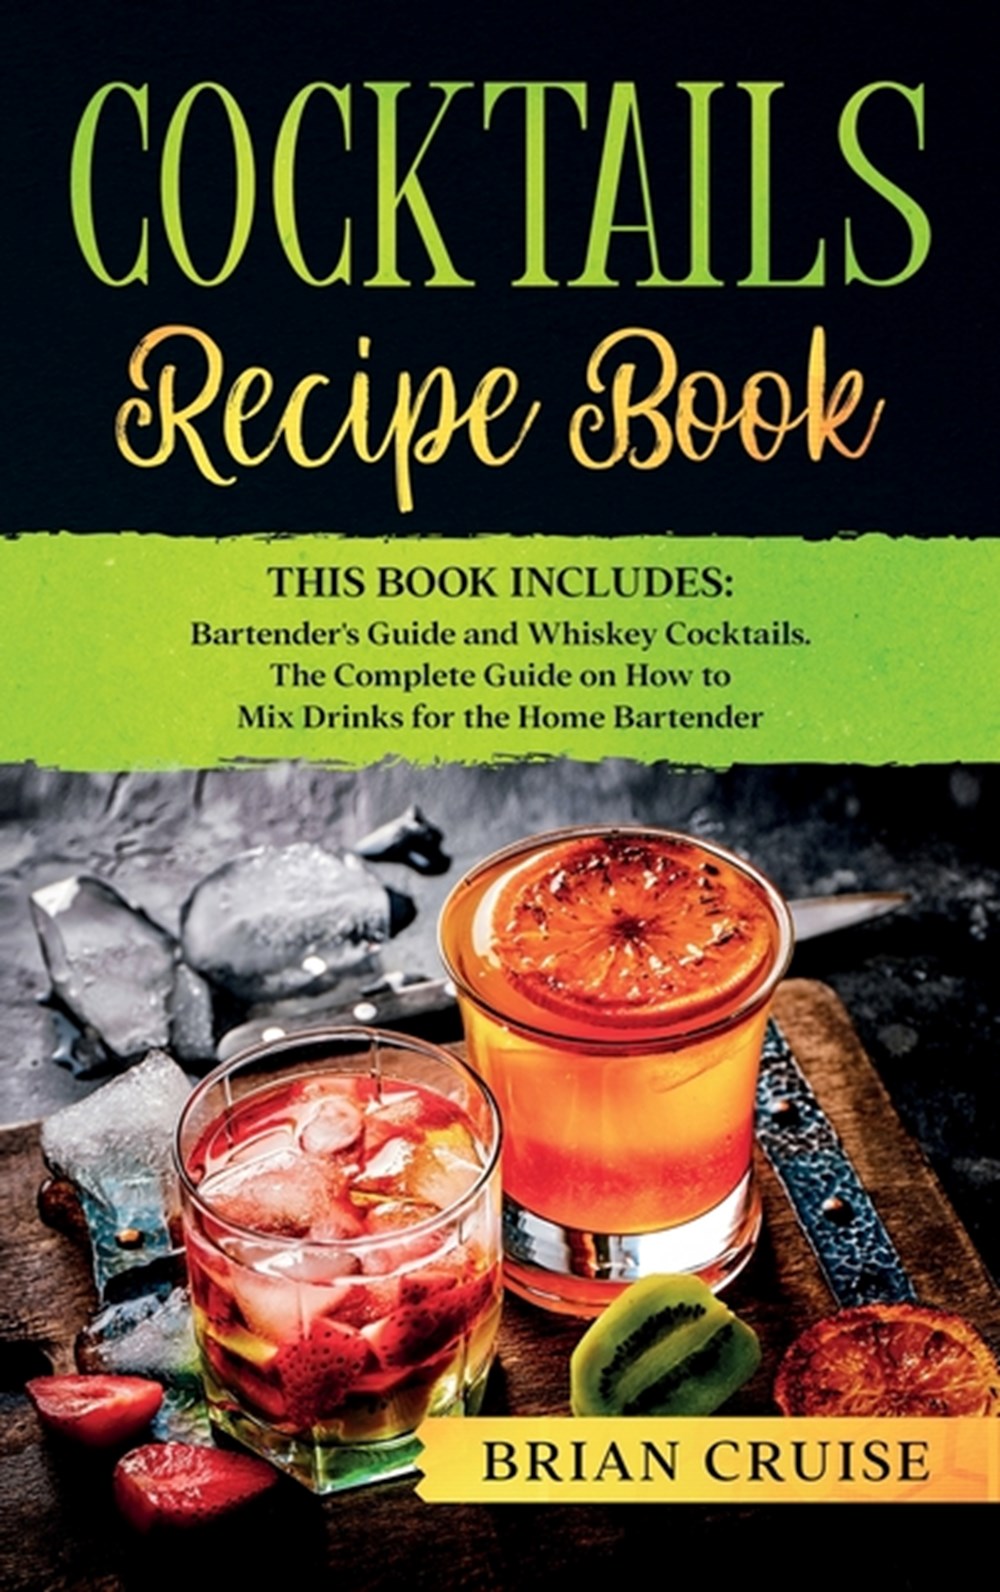 Buy Cocktails Recipe Book This Book Includes Bartender S Guide And